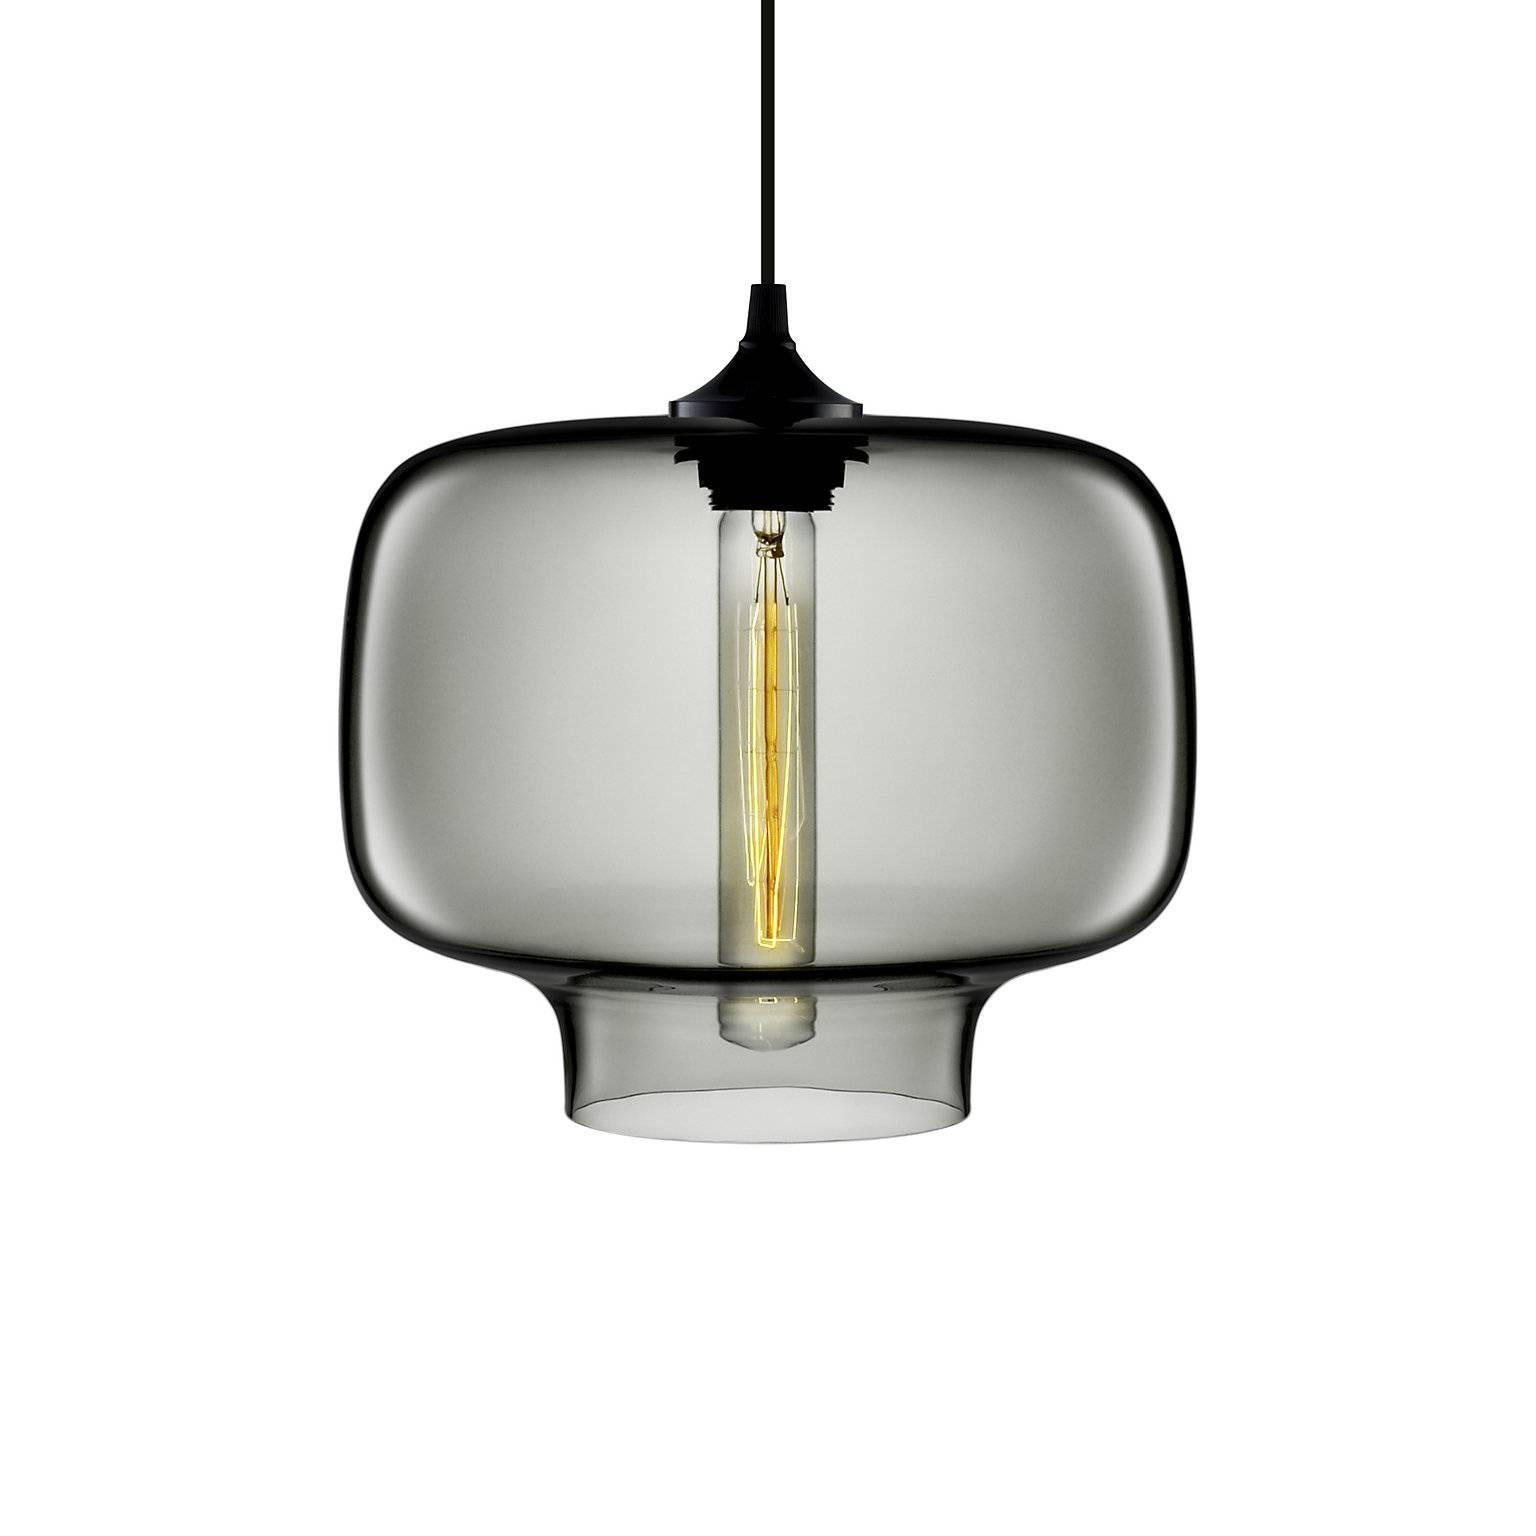 American Oculo Plum Handblown Modern Glass Pendant Light, Made in the USA For Sale